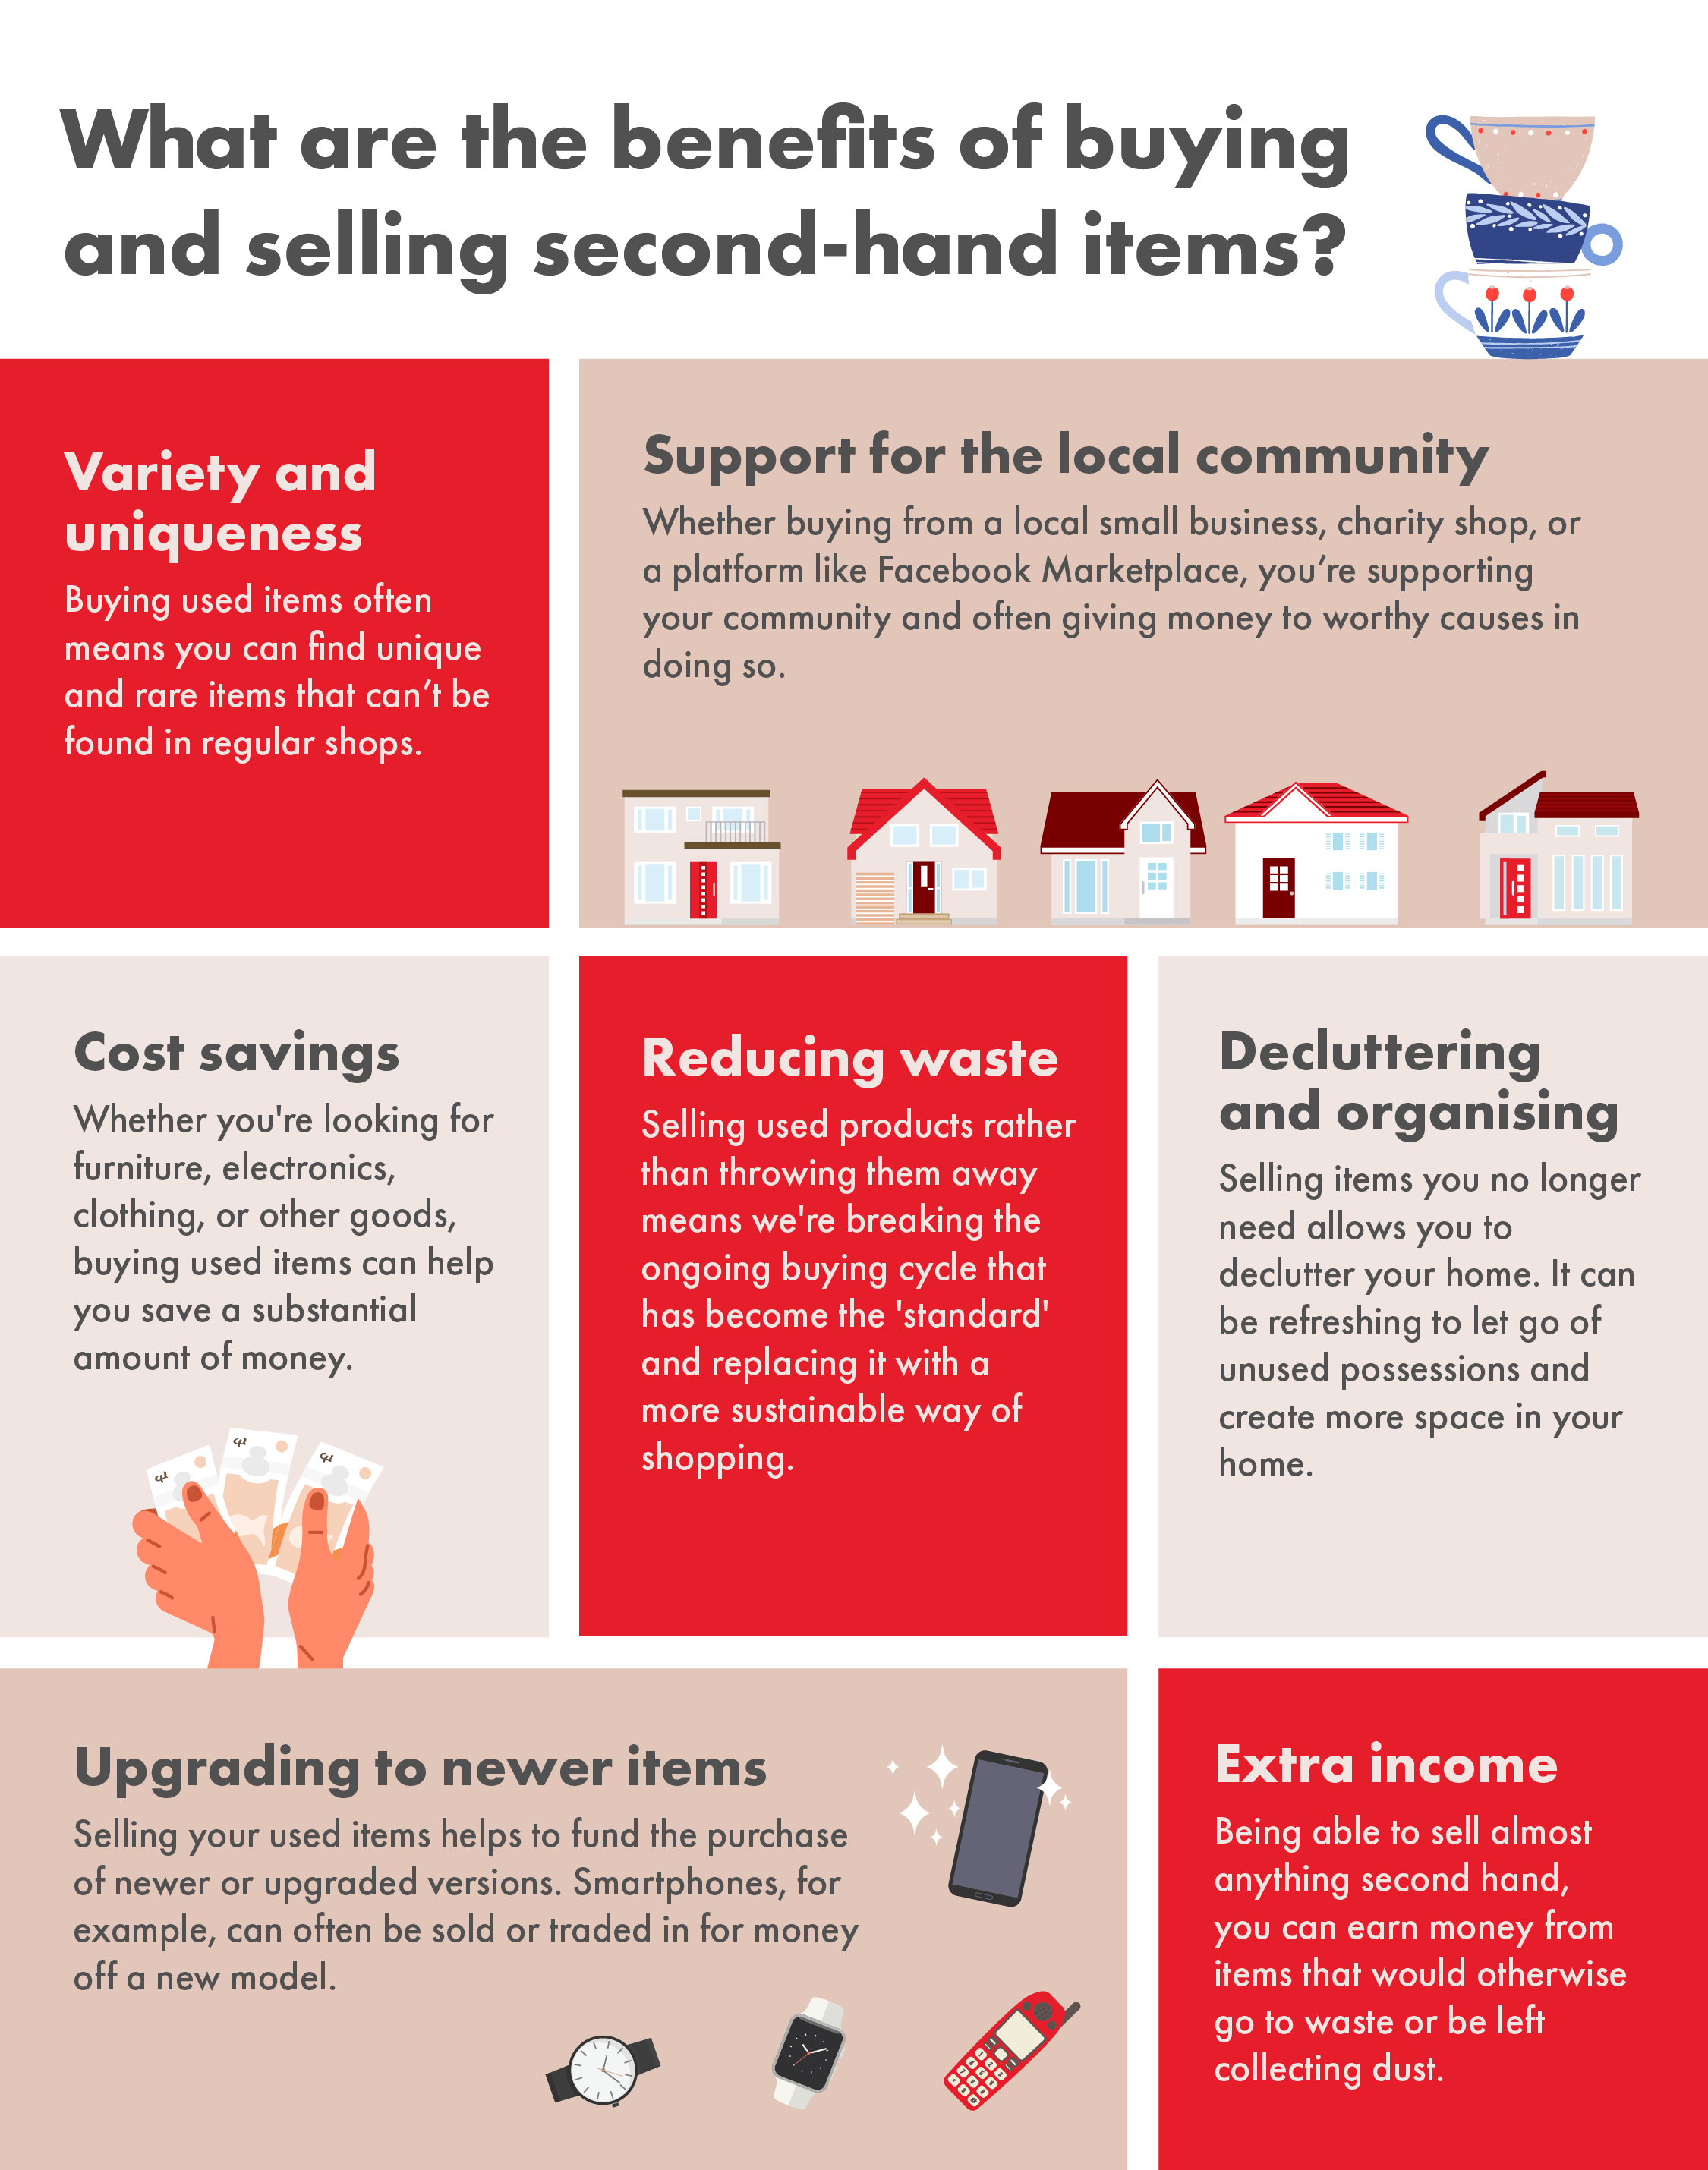 Benefits of buying and selling second hand items